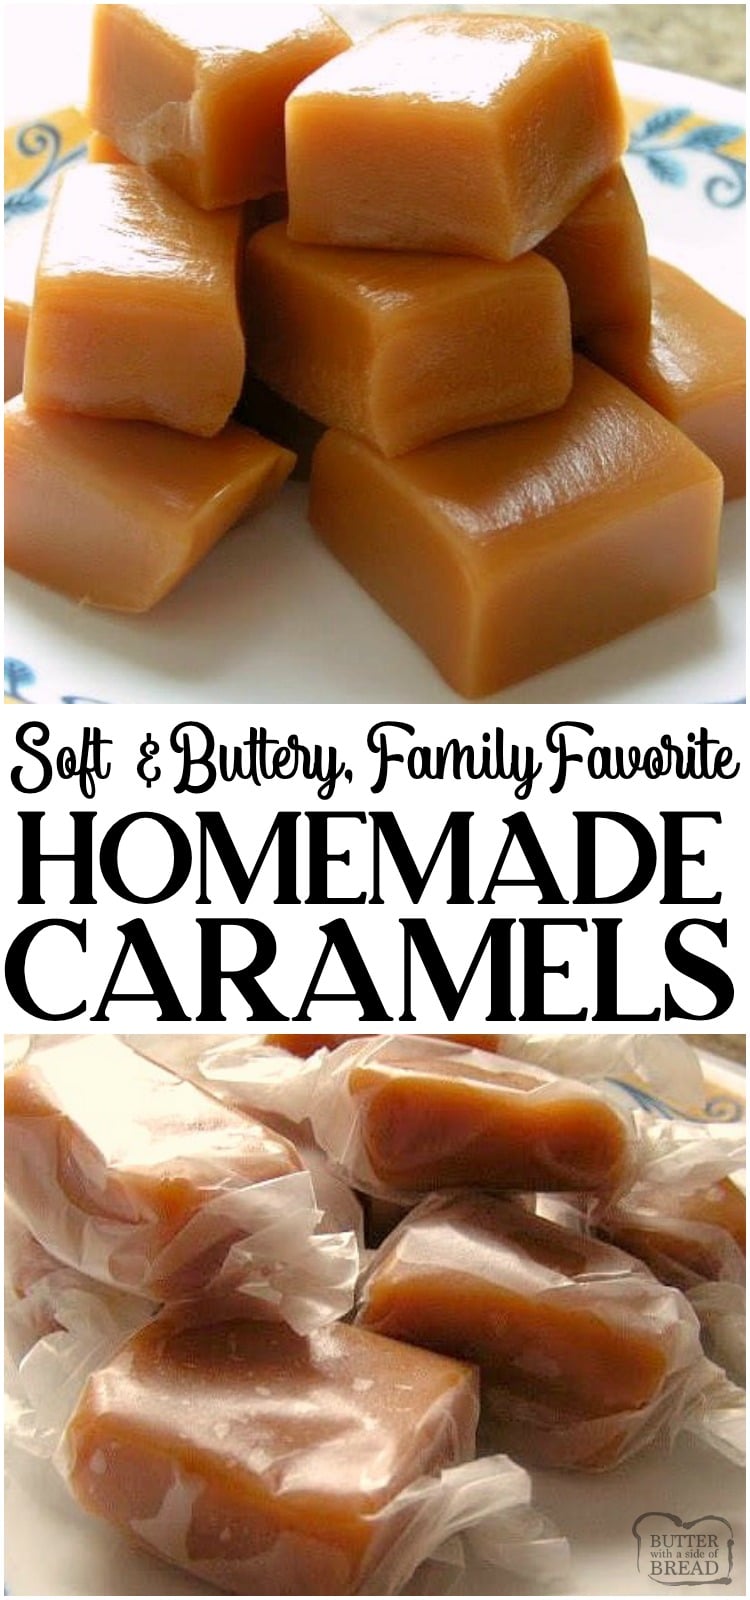 These Homemade Caramels will absolutely melt in your mouth! Incredible from scratch recipe for Homemade Caramel made with heavy cream and butter. #caramel #candy #homemade #recipe #Christmas #caramels #butter from BUTTER WITH A SIDE OF BREAD